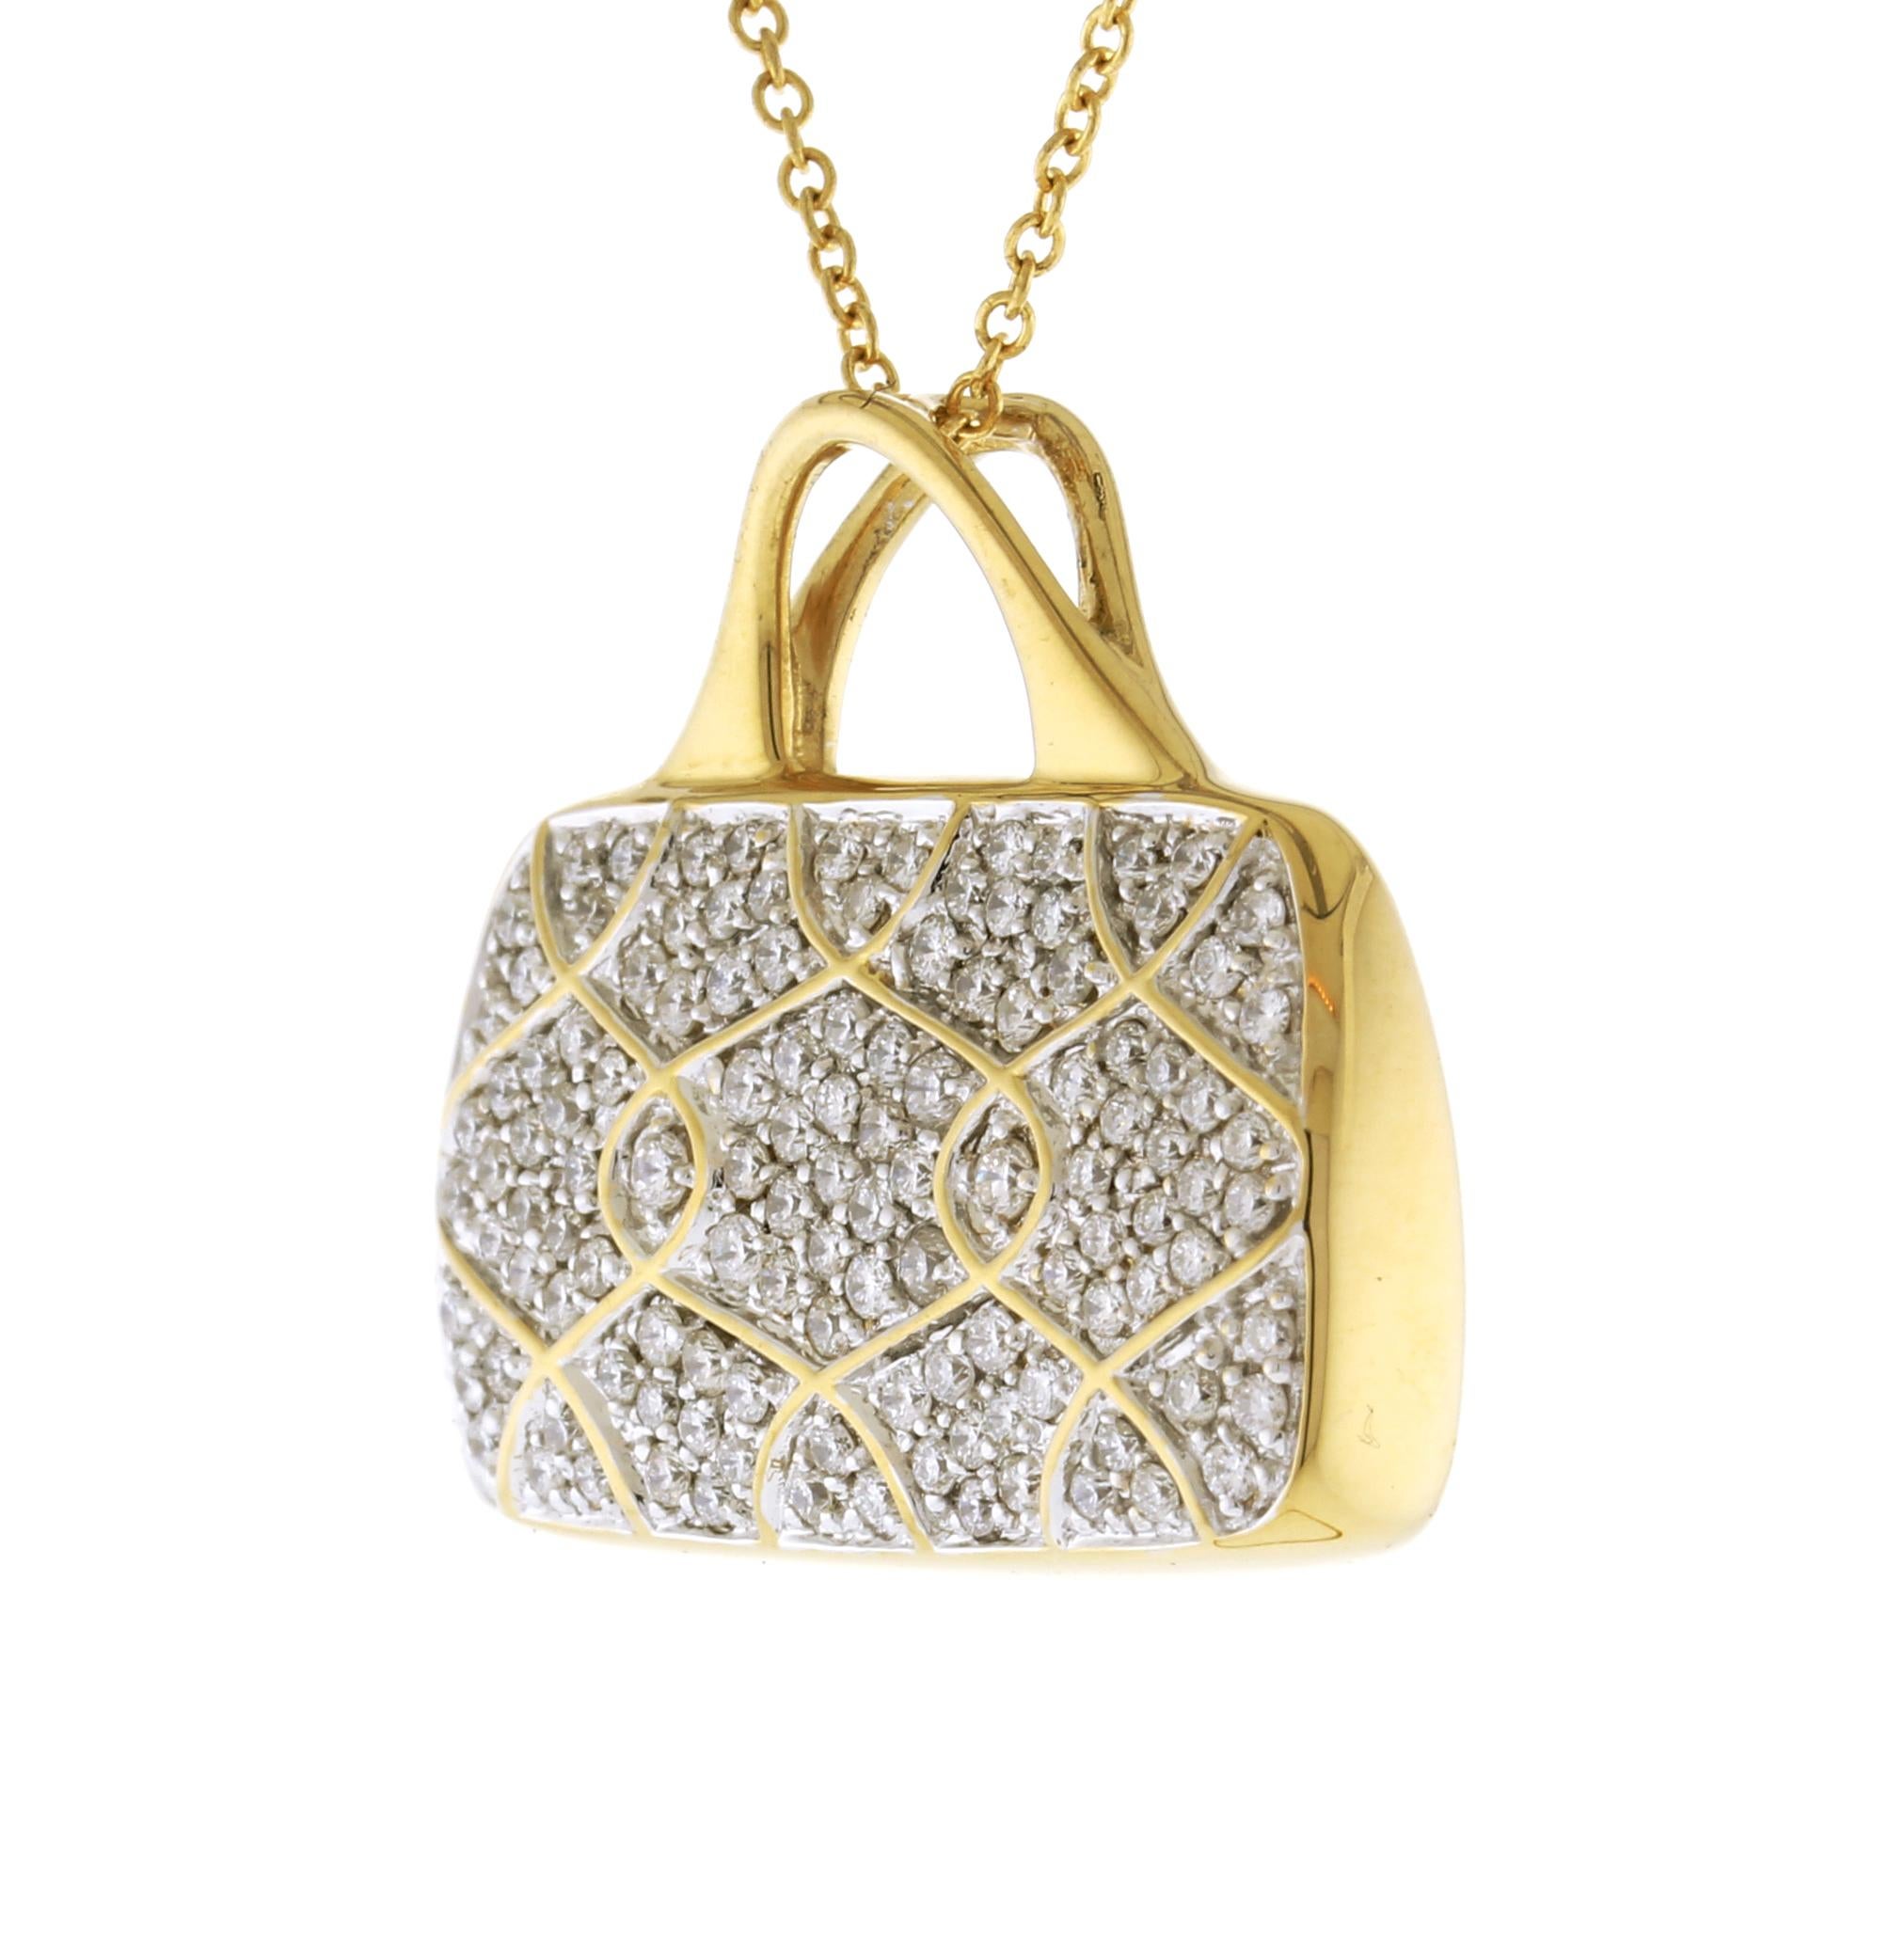 This pendant, crafted in the shape of a purse, features a stunning array of pave diamonds adorning its surface.
♦ Designer: Mirabelle
♦ Circa: 2020s
♦ Metal: 18 Karat Gold
♦ Width: 1inch
♦ Gemstones: Diamonds =1.60cts approximately
♦ Packaging: